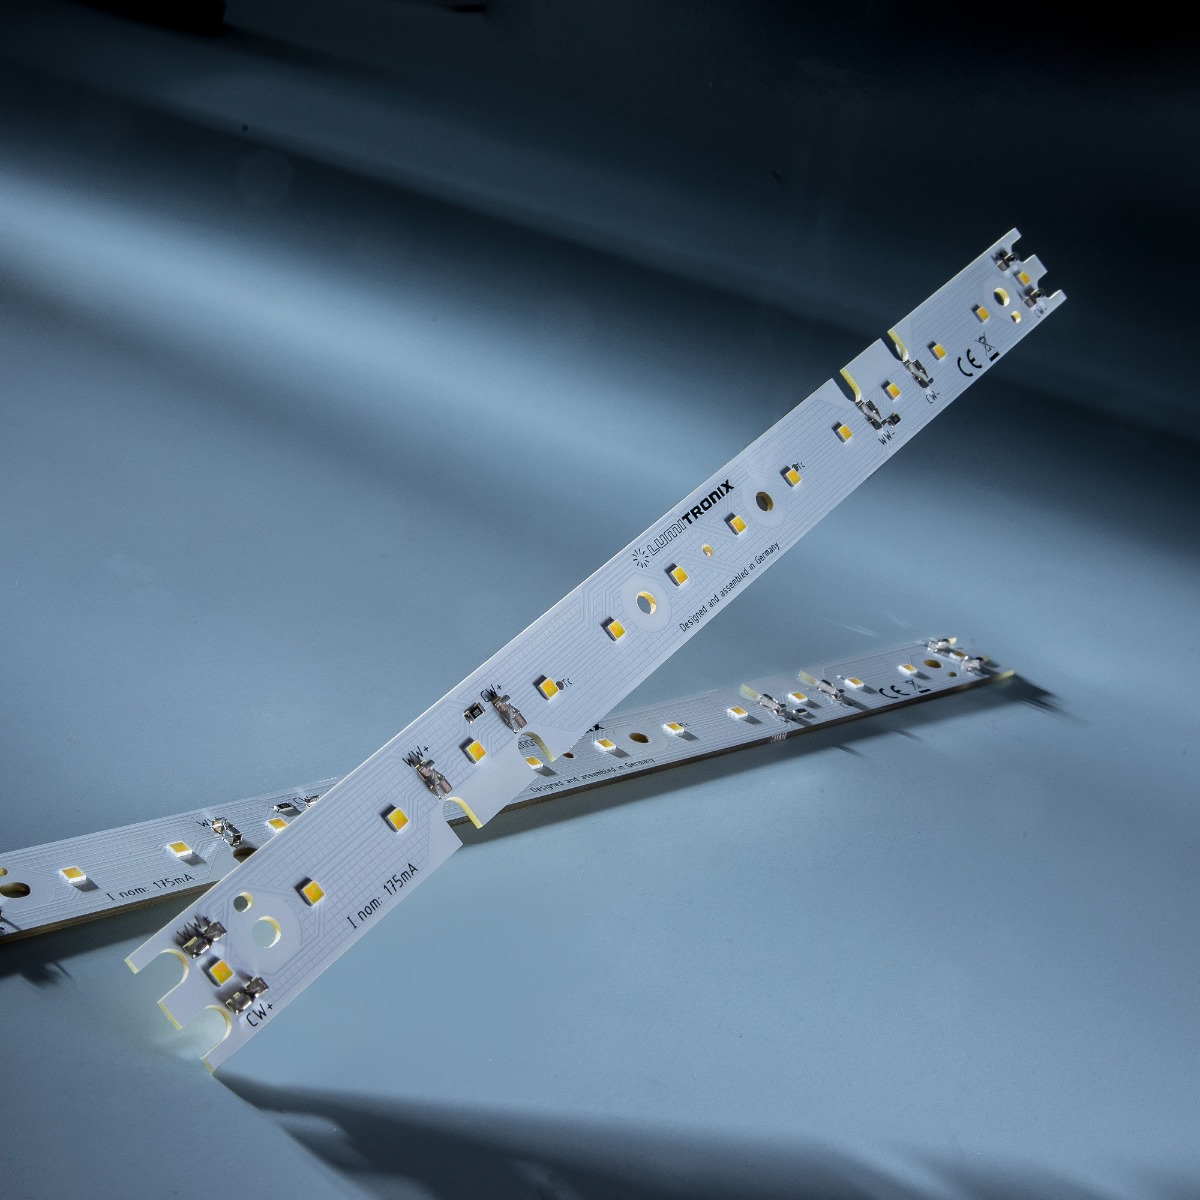  Daisy 14 Nichia NF2W757G-MT LED Strip 2 in 1 Tunable White 2700-6500K 290+300lm 175mA 19.9V 14 LEDs 28cm module (up to 1071lm/m)